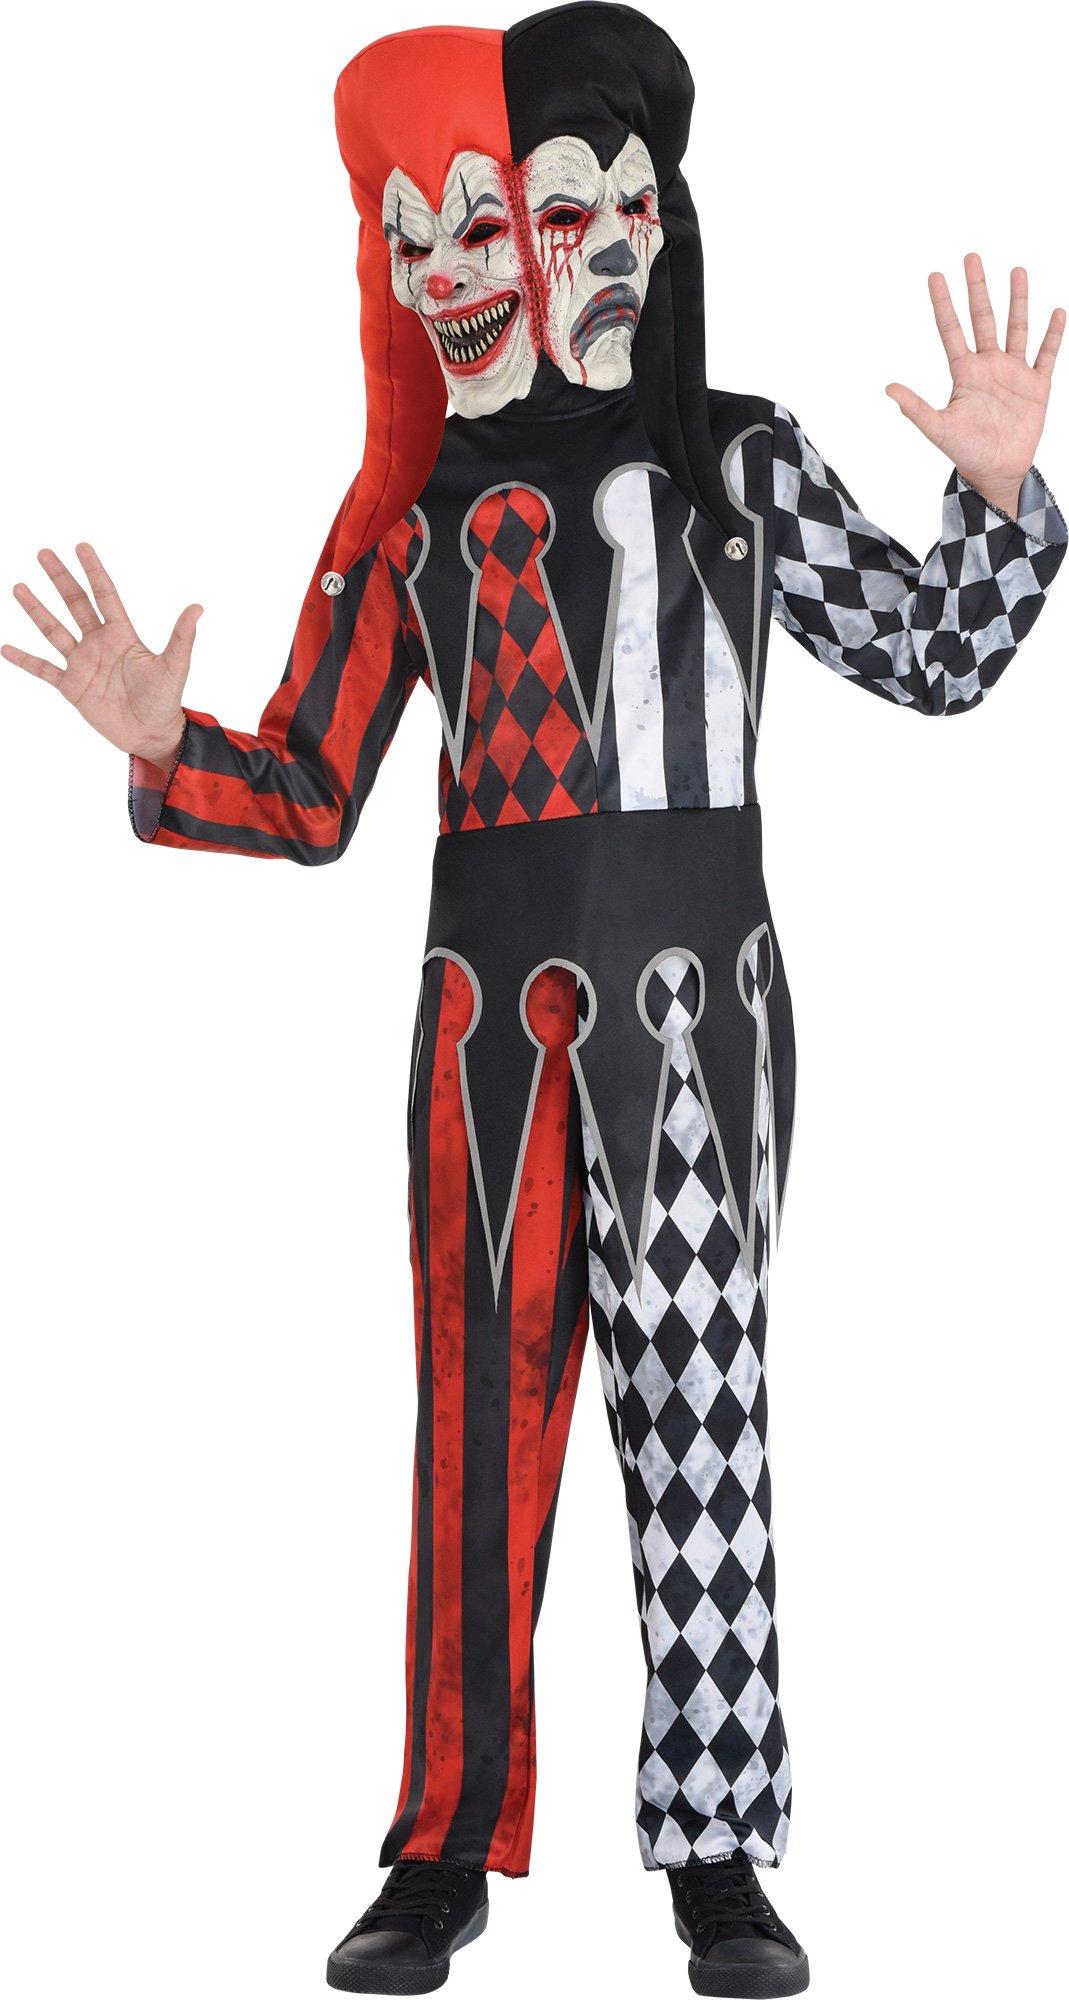 Kids' Two-Faced Jester Costume